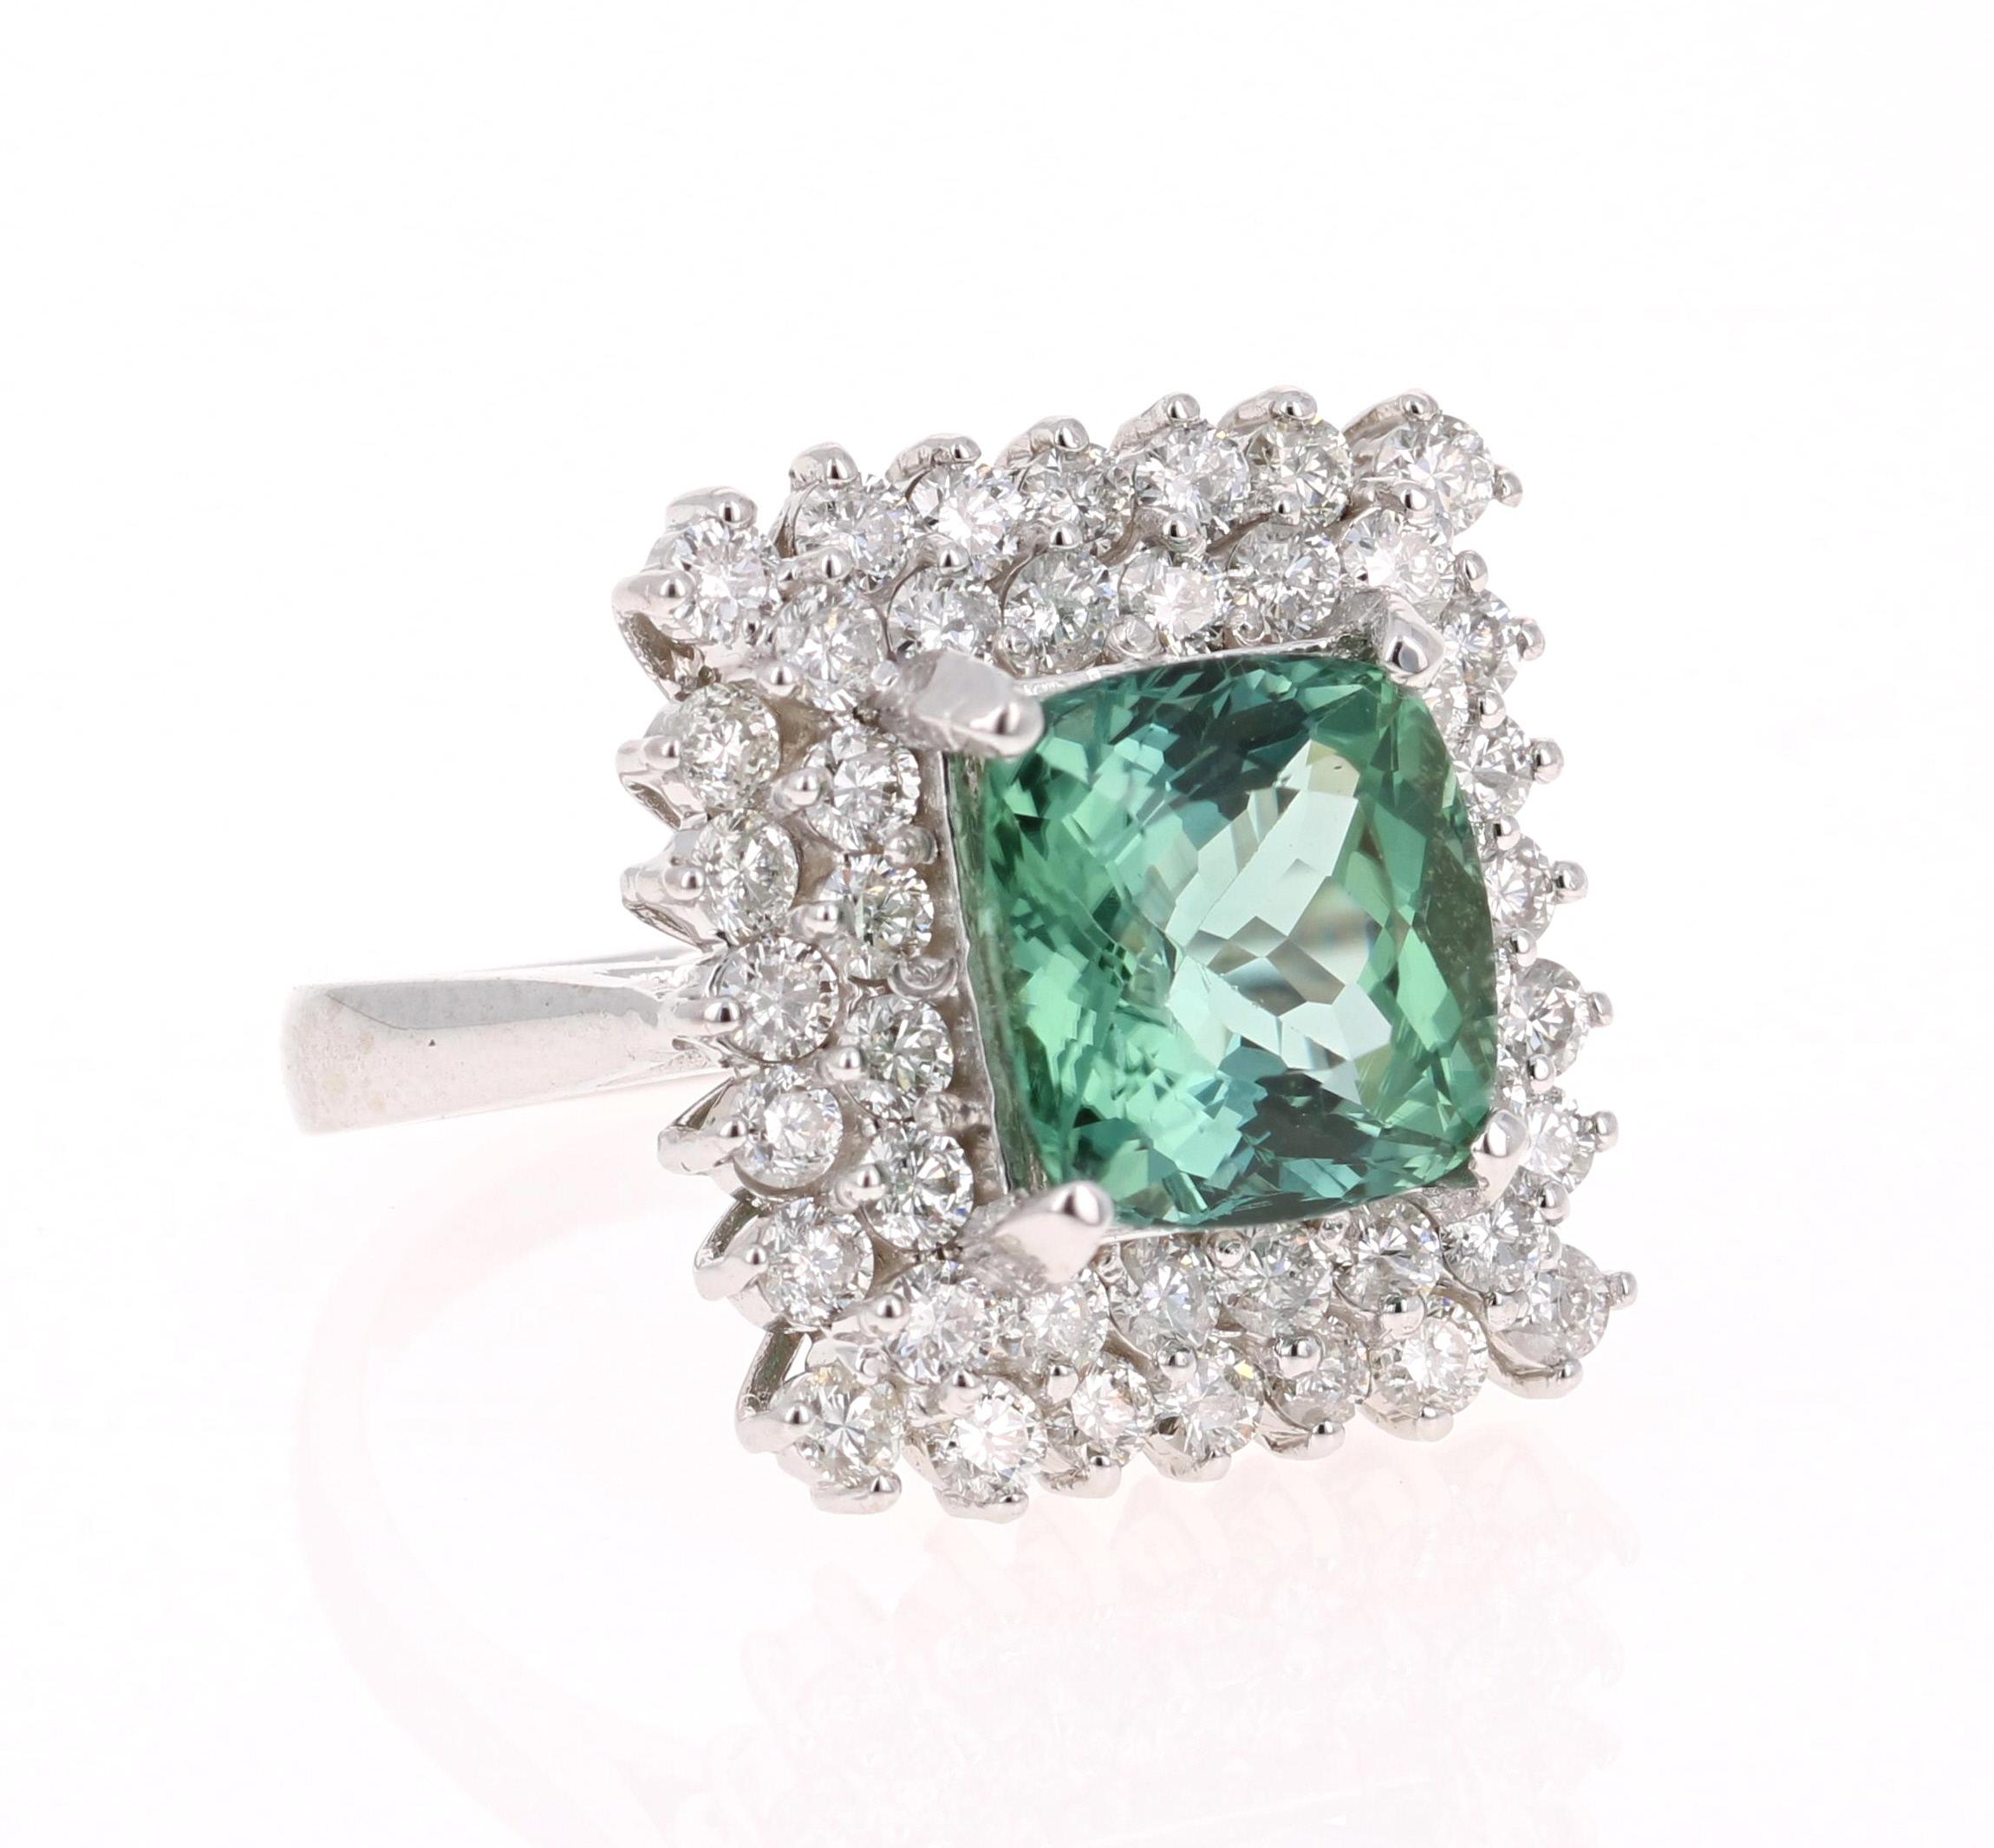 Gorgeous & Unique Cocktail Ring!

This ring has a STUNNING Cushion Cut Mint Green Tourmaline that weighs 4.30 Carats. Floating around the tourmaline are 44 Round Cut Diamonds that weigh 1.71 Carats. The total carat weight of the ring is 6.01 Carats.